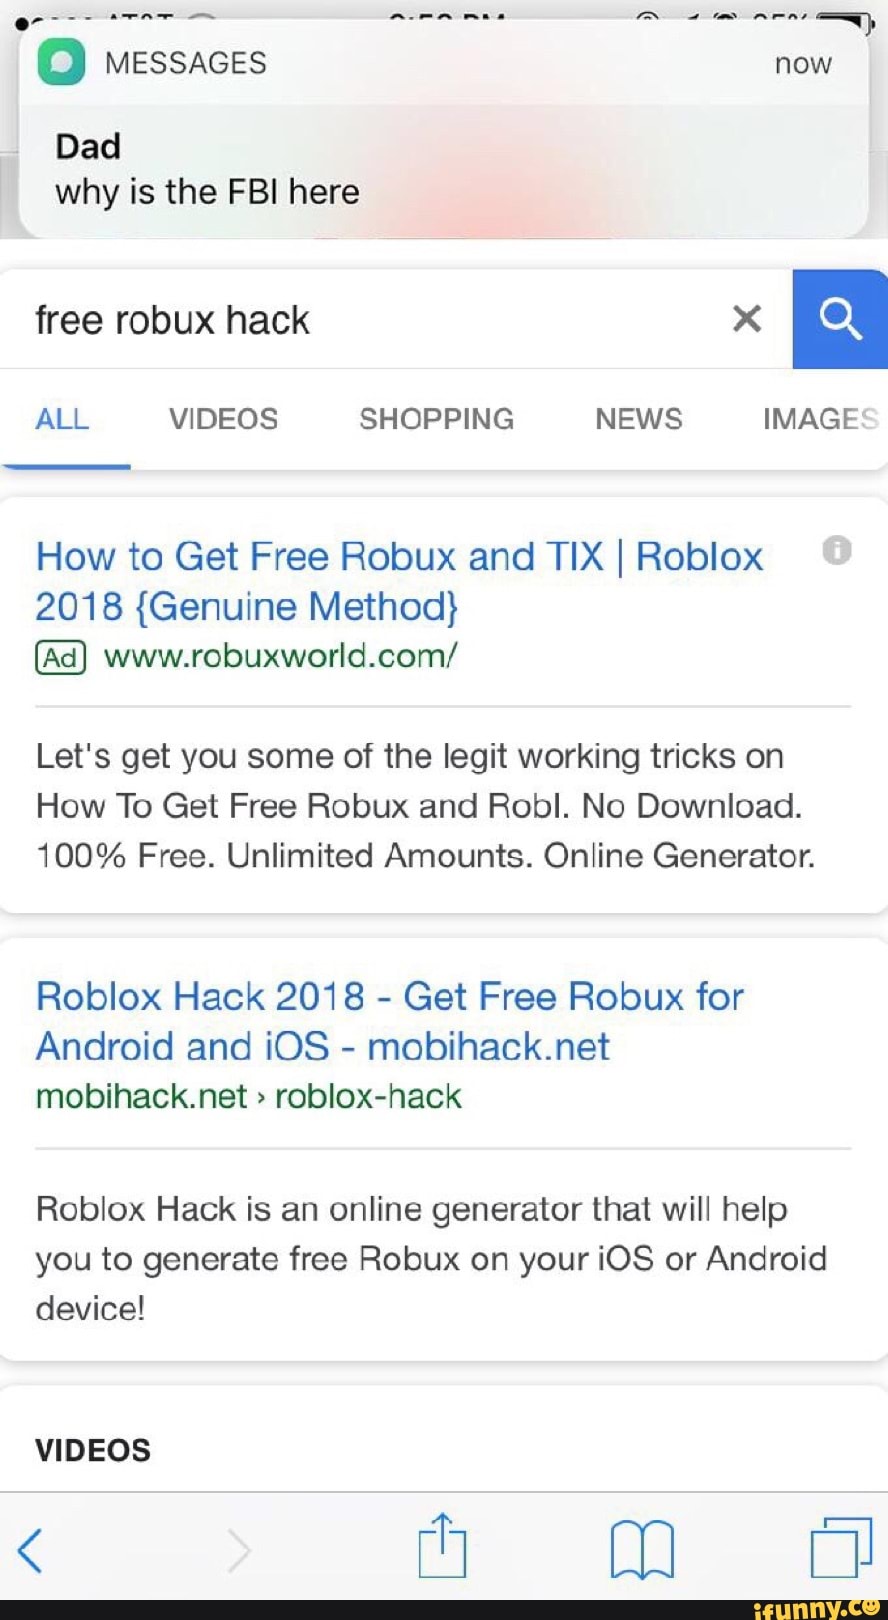 Uq O Messages Now Dad Why Is The Fbi Here How To Get Free Robux And Tix I Roblox 2018 Genuine Method Www Robuxworld Com Let S Get You Some Of The Legit Working